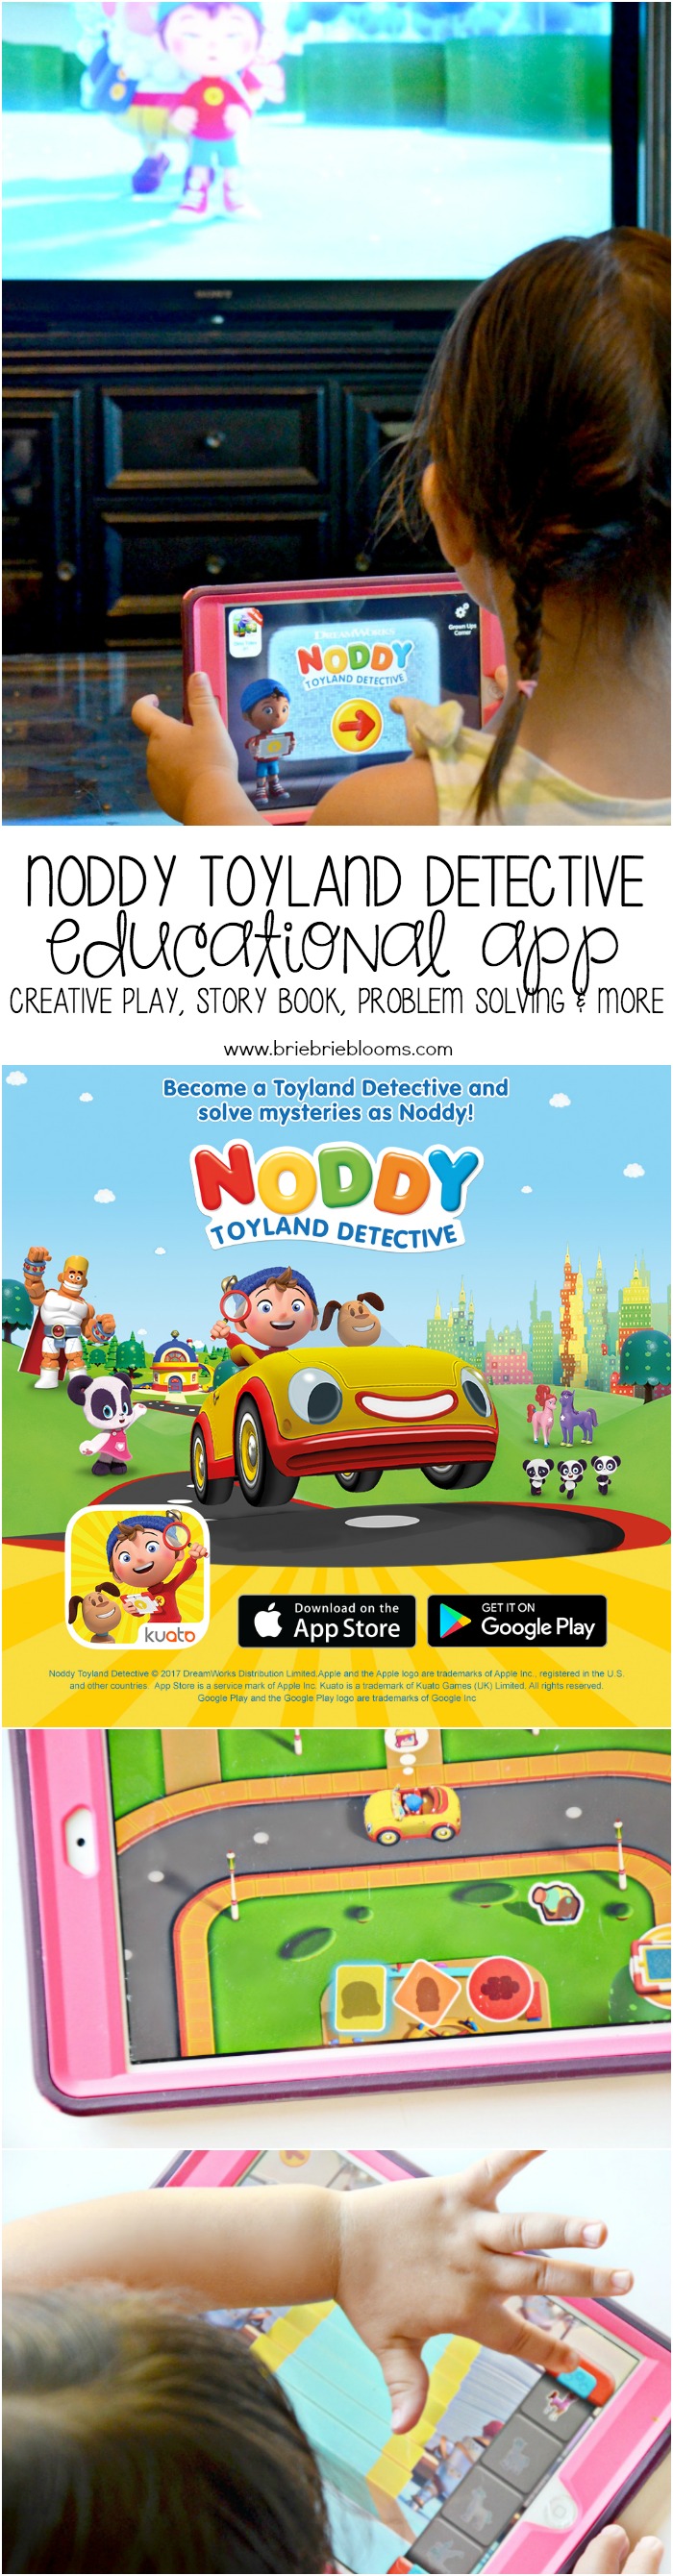 The Noddy Toyland Detective app is educational and provides a great resource for creative play, problem solving and so much more for children under five.